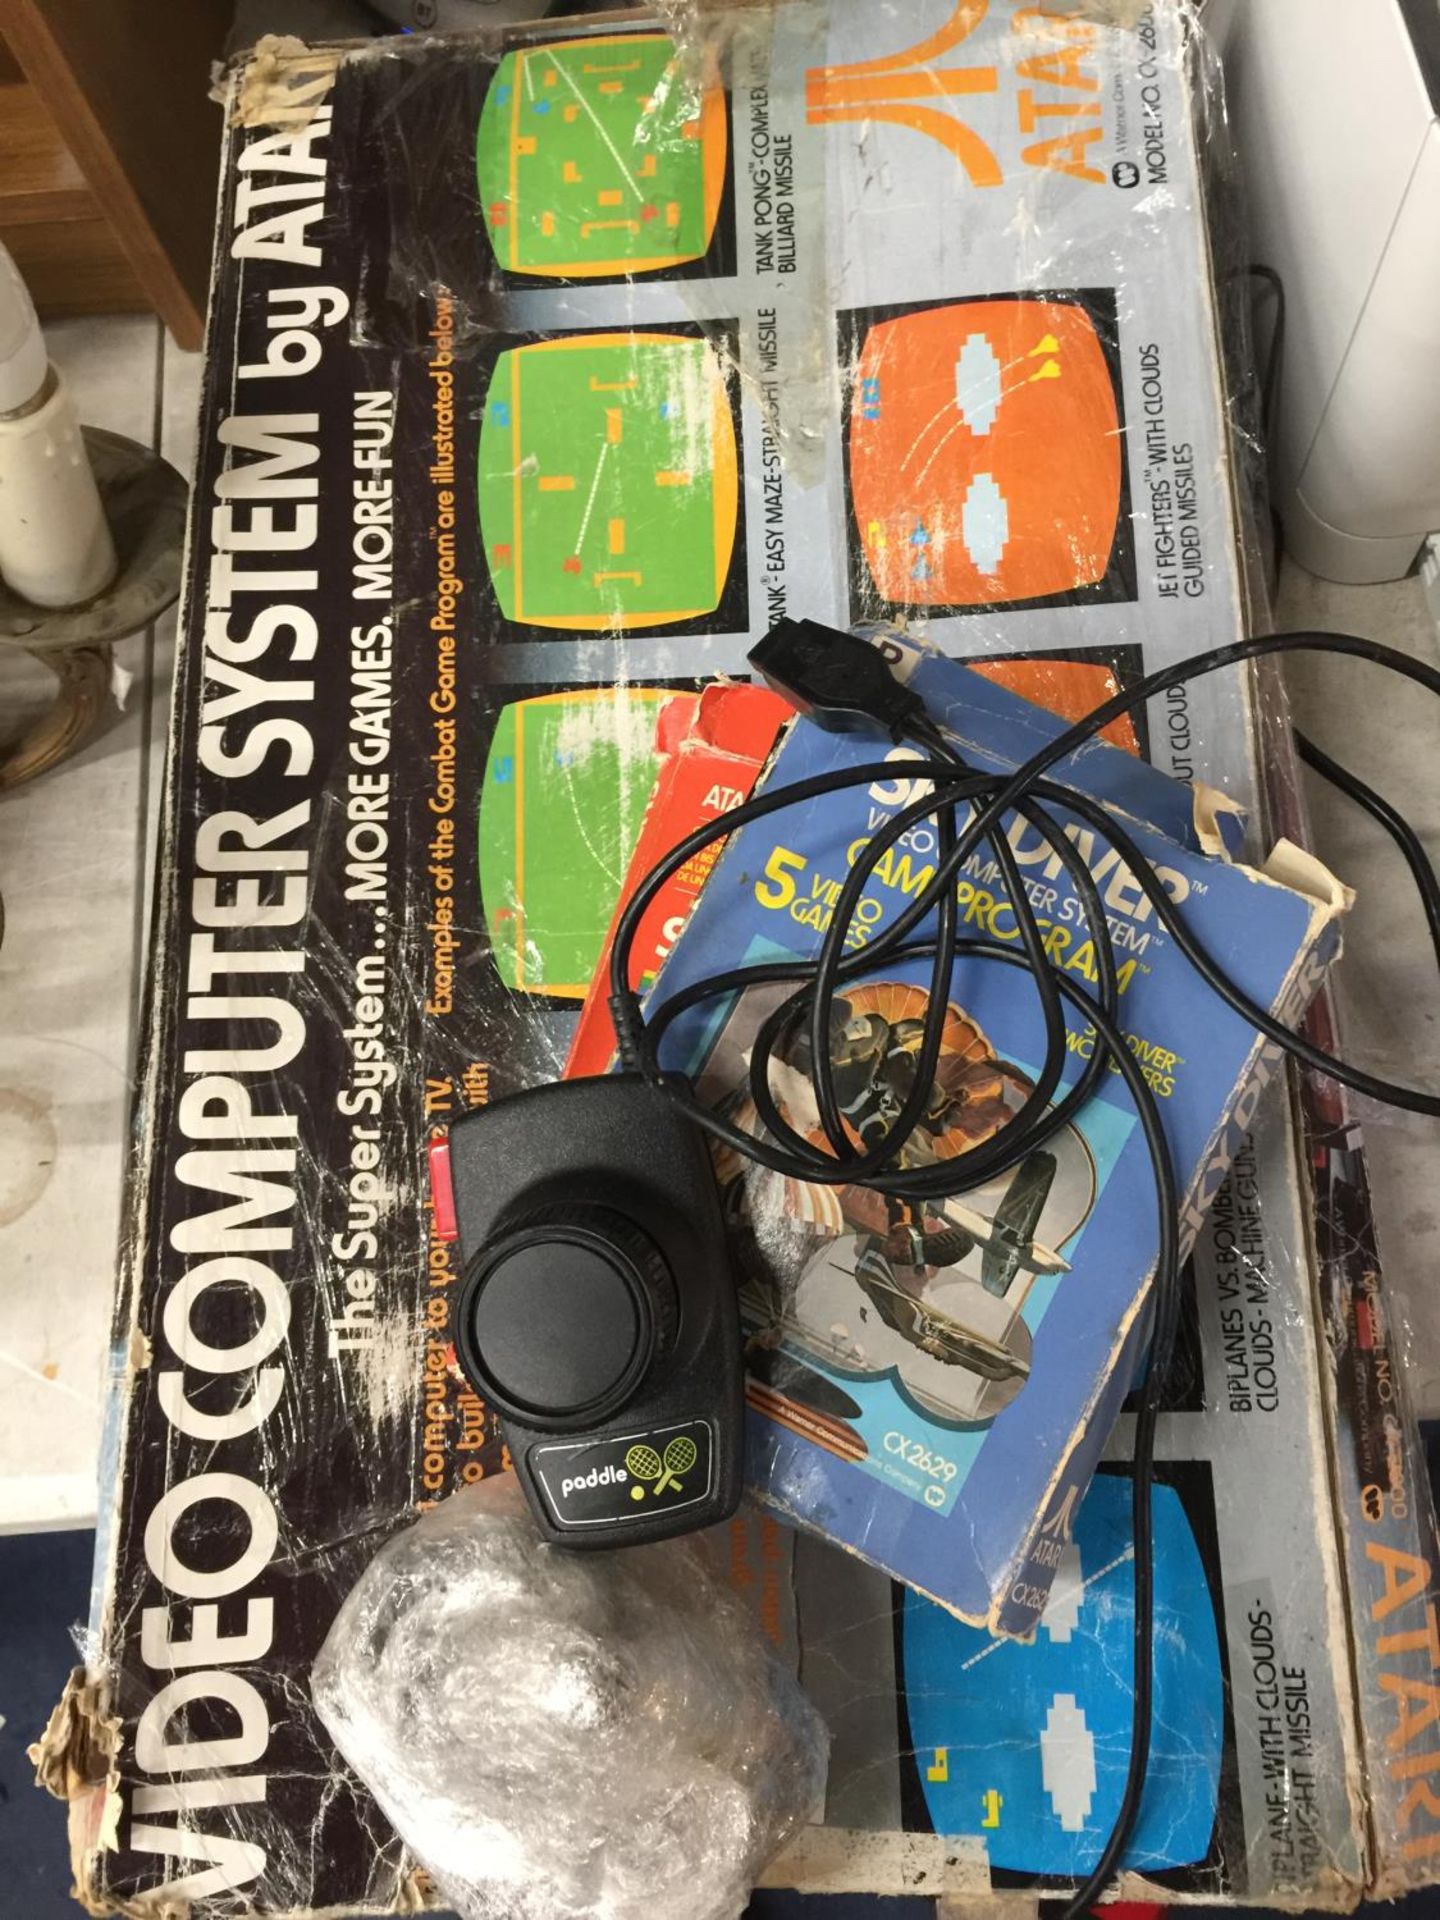 A VINTAGE ATARI GAMES CONSOLE 2600, JOYPADS, CONTROLLERS, POWER PACKS PLUS 6 GAMES - KUNG FU MASTER, - Image 3 of 4